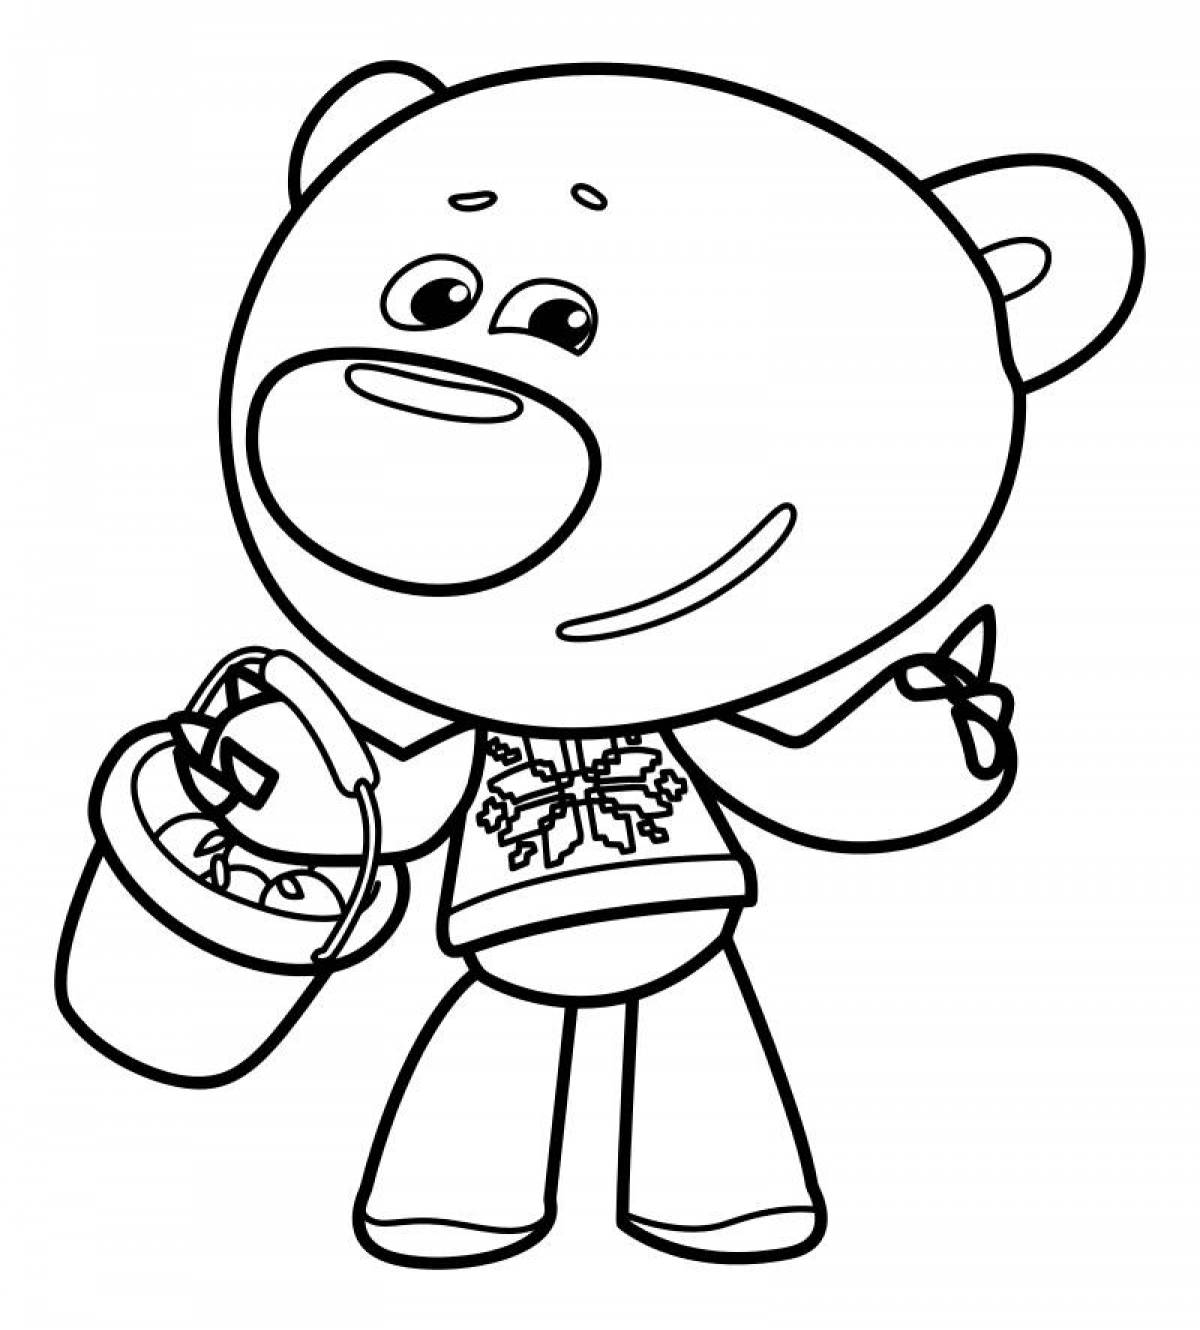 Cozy bear coloring pages